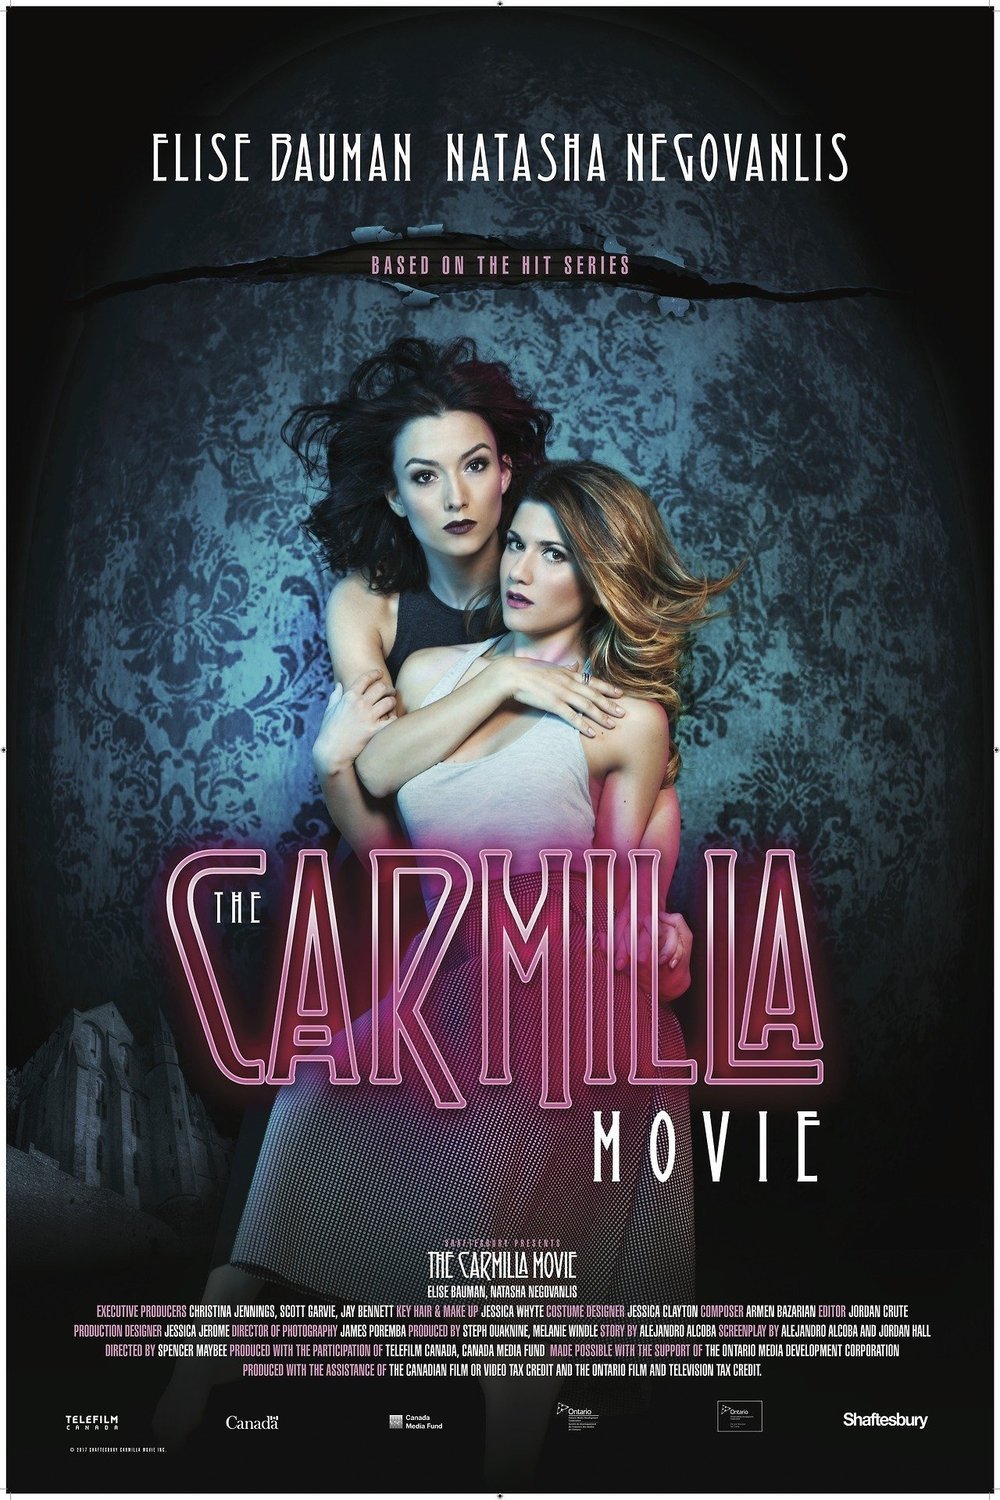 Poster of the movie The Carmilla Movie